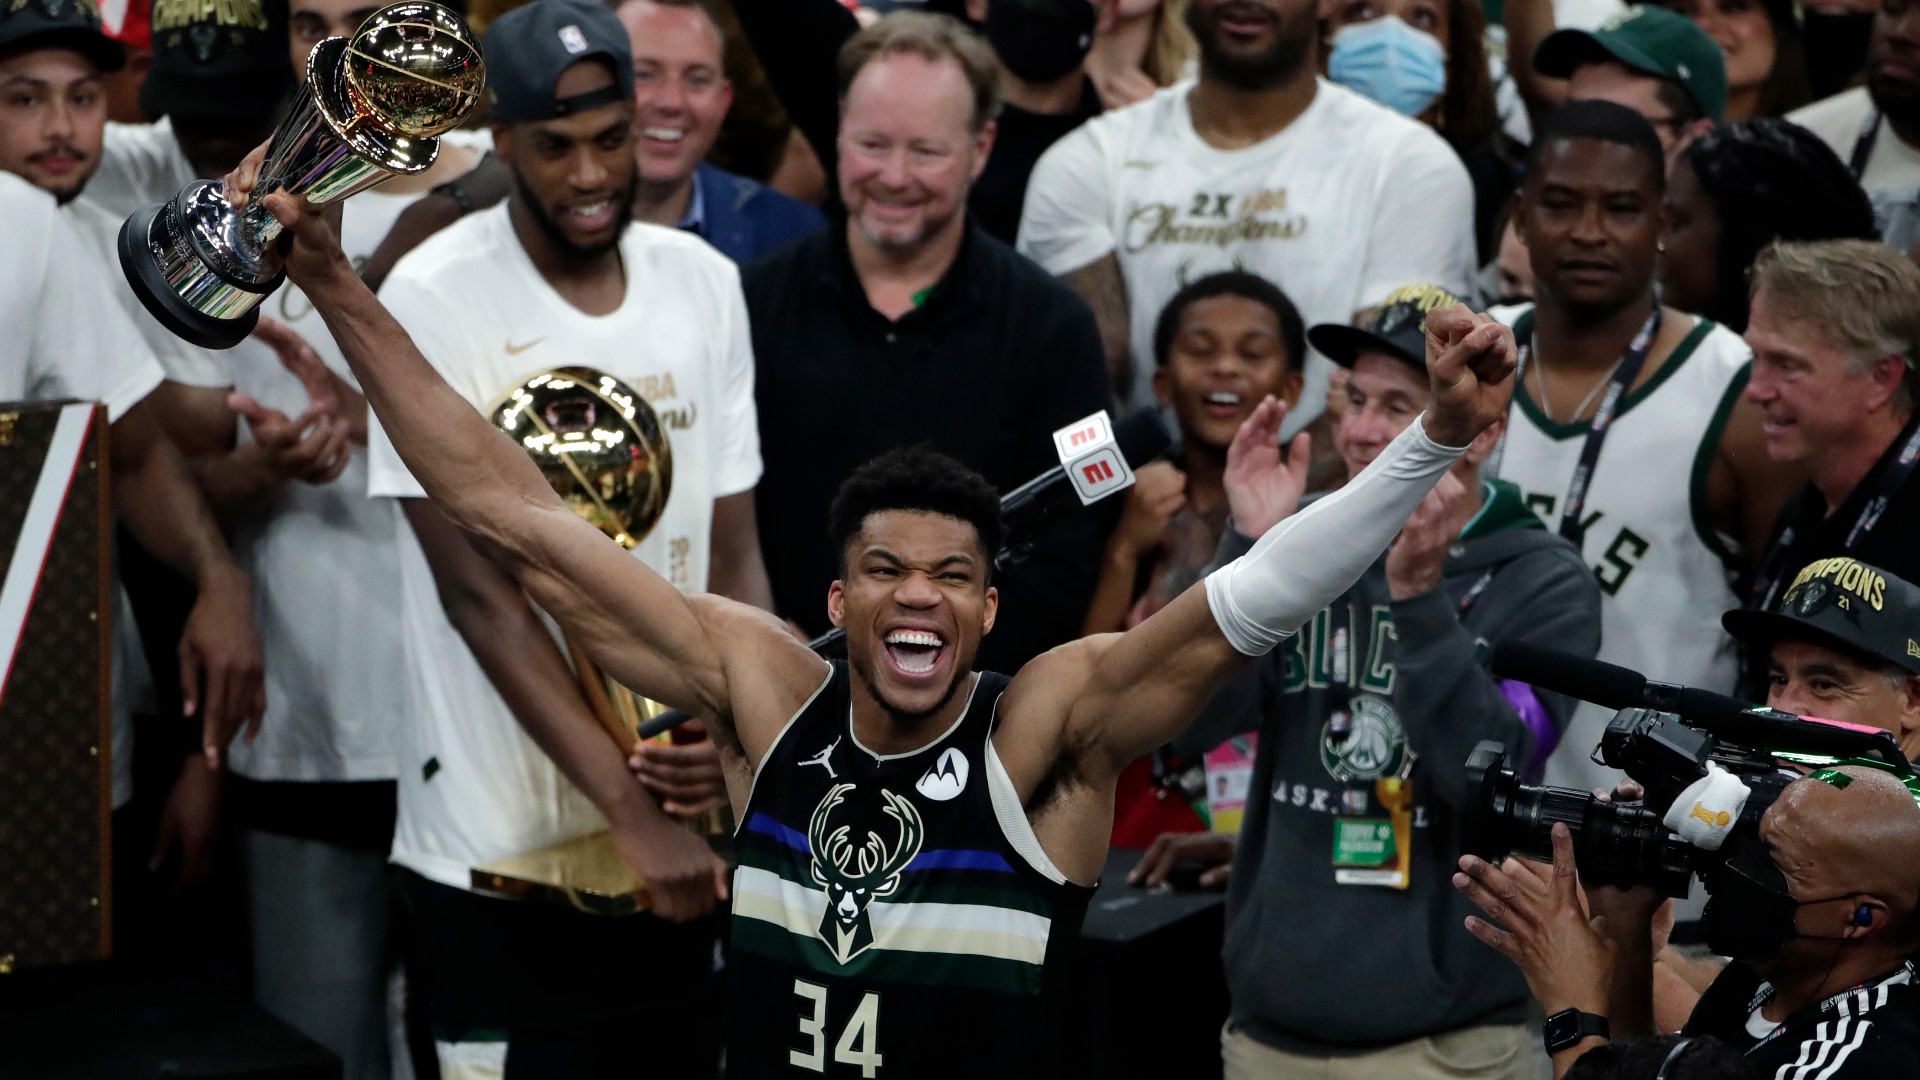 The Bucks took Game 6 in Milwaukee to win their fourth straight game after being down 0-2 to start the series.